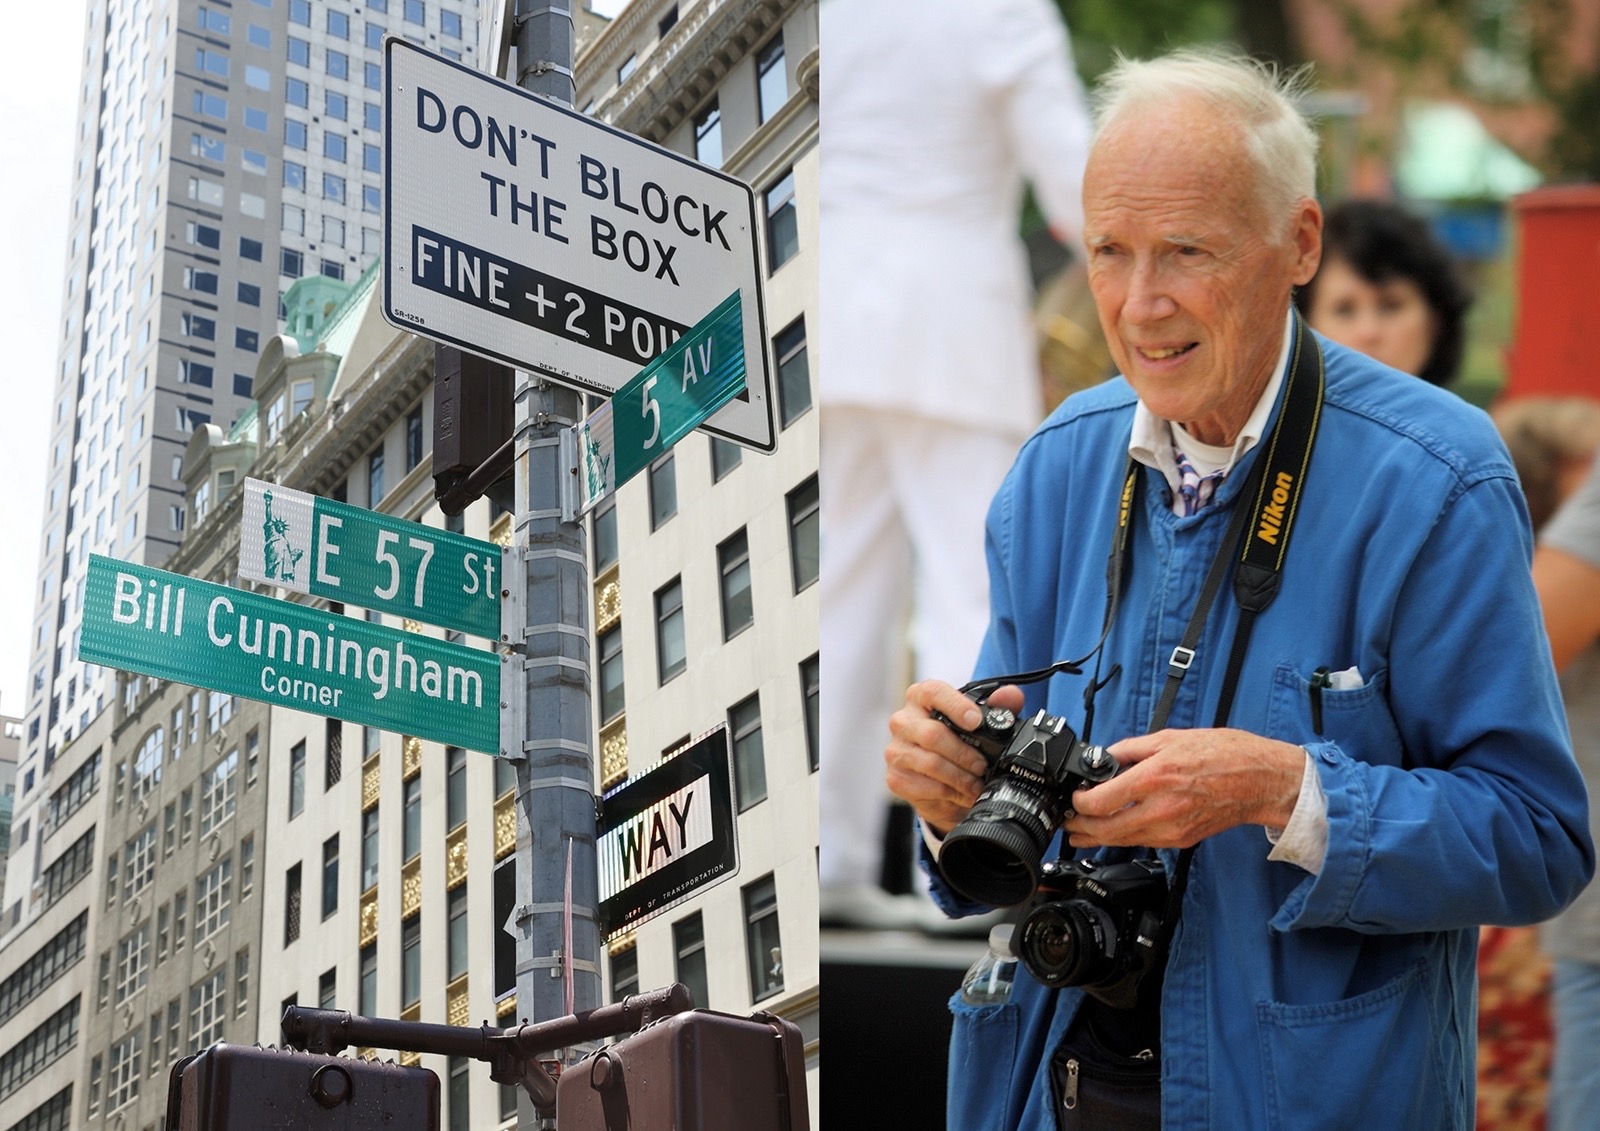 Online photo of Bill Cunningham Corner in NYC at Fifth Avenue at 57th Street